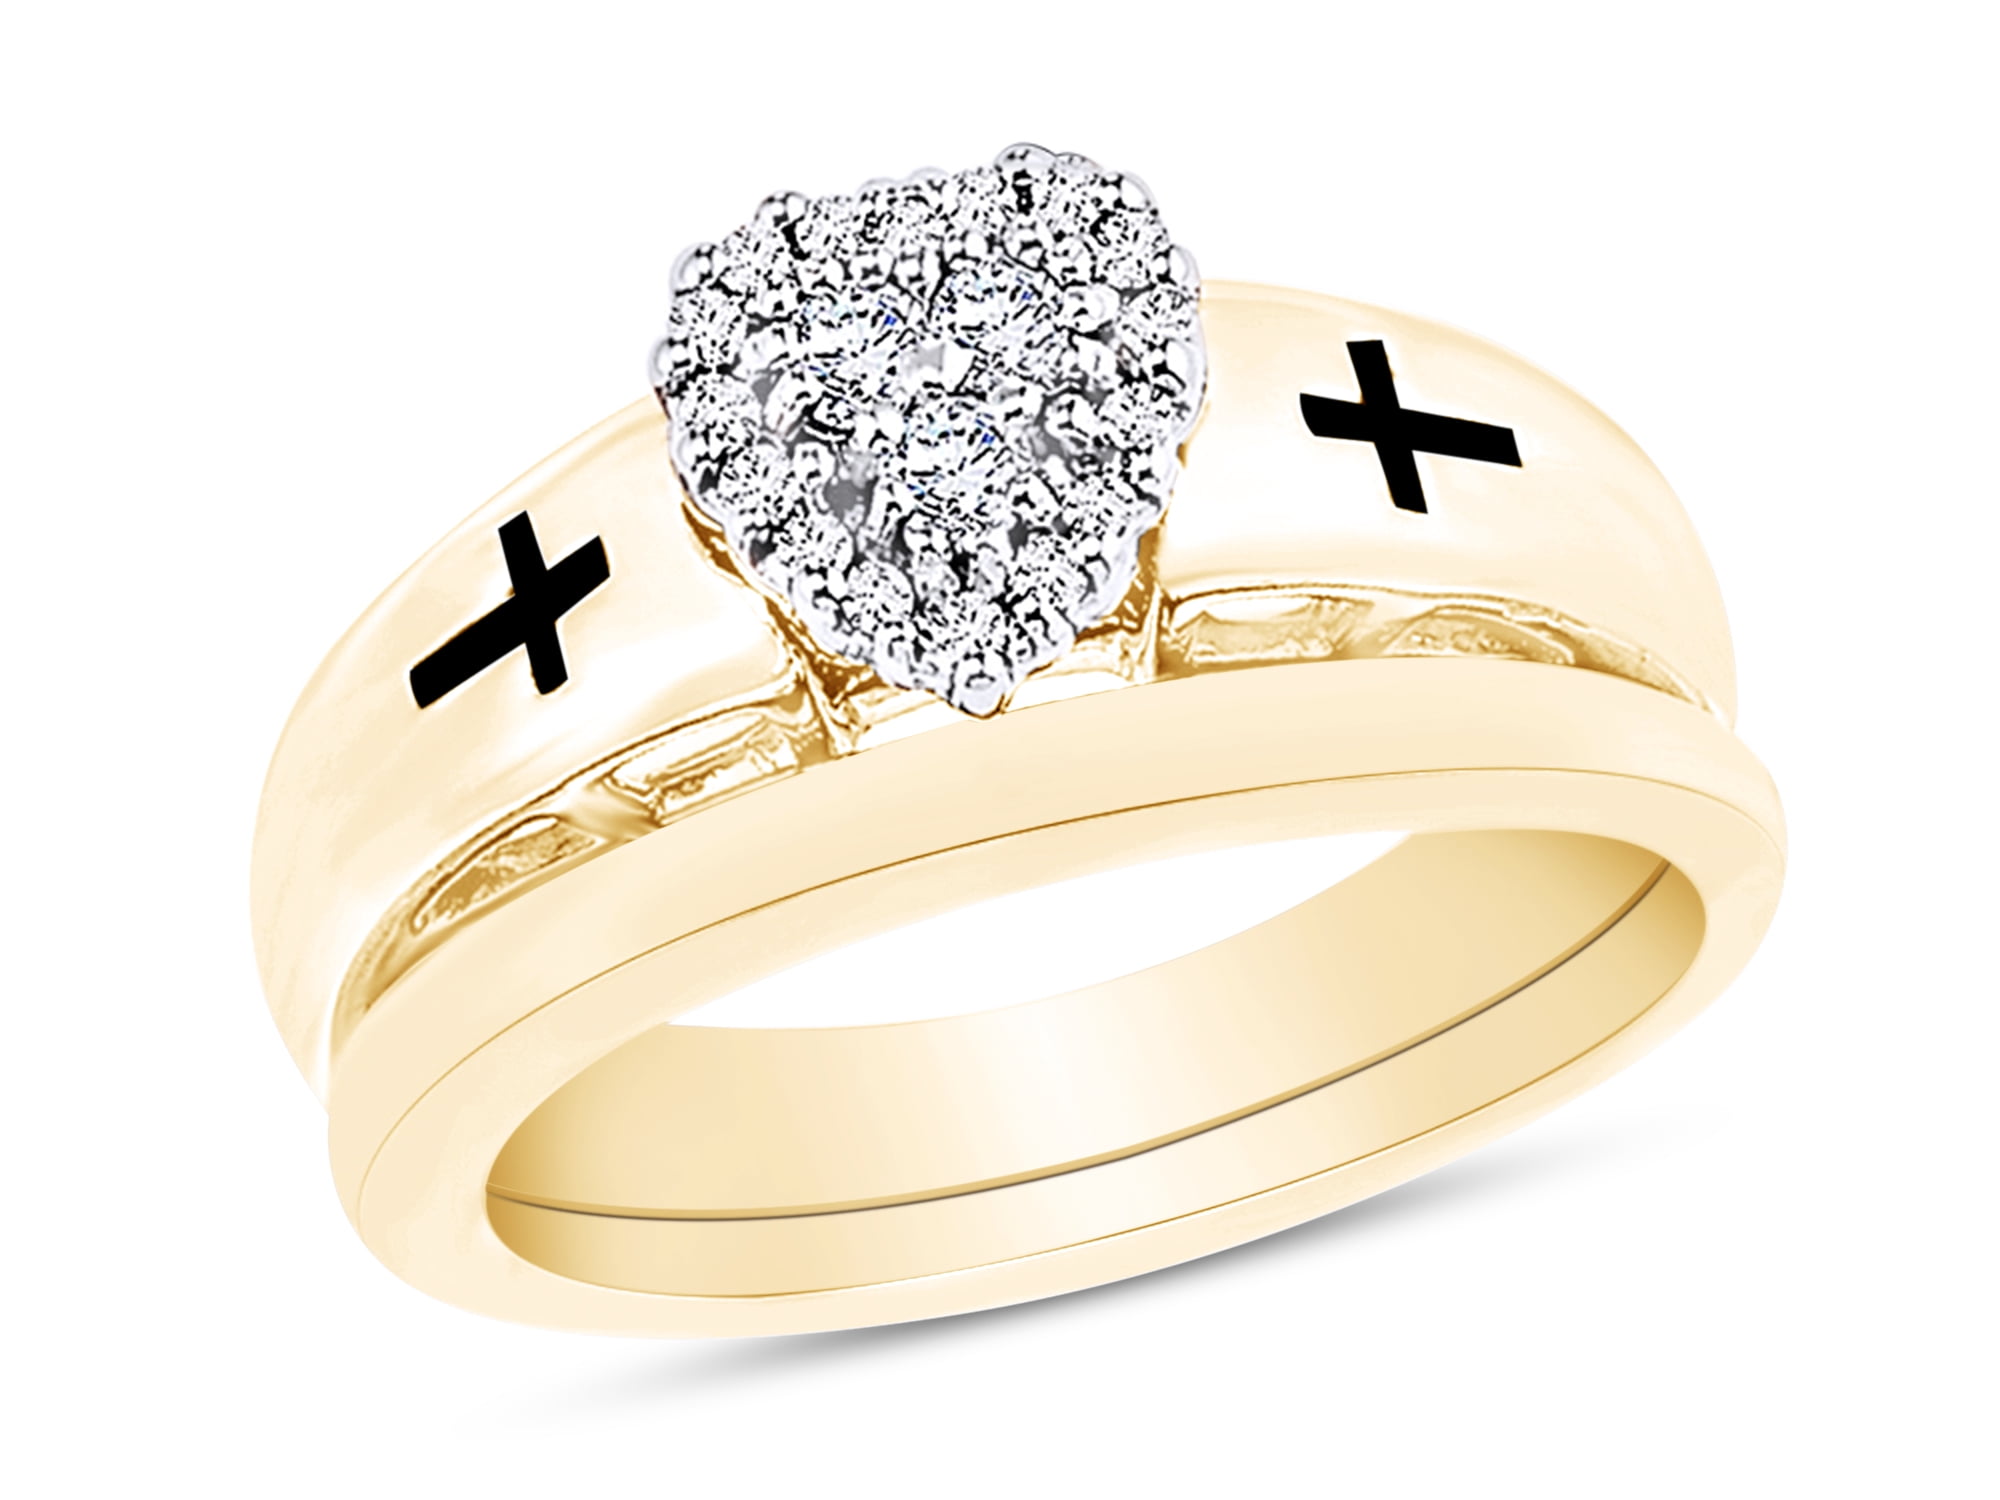 Details about   14K Yellow Gold Finish 0.50 Ct Diamond Engagement Ring Wedding Band Trio Set 